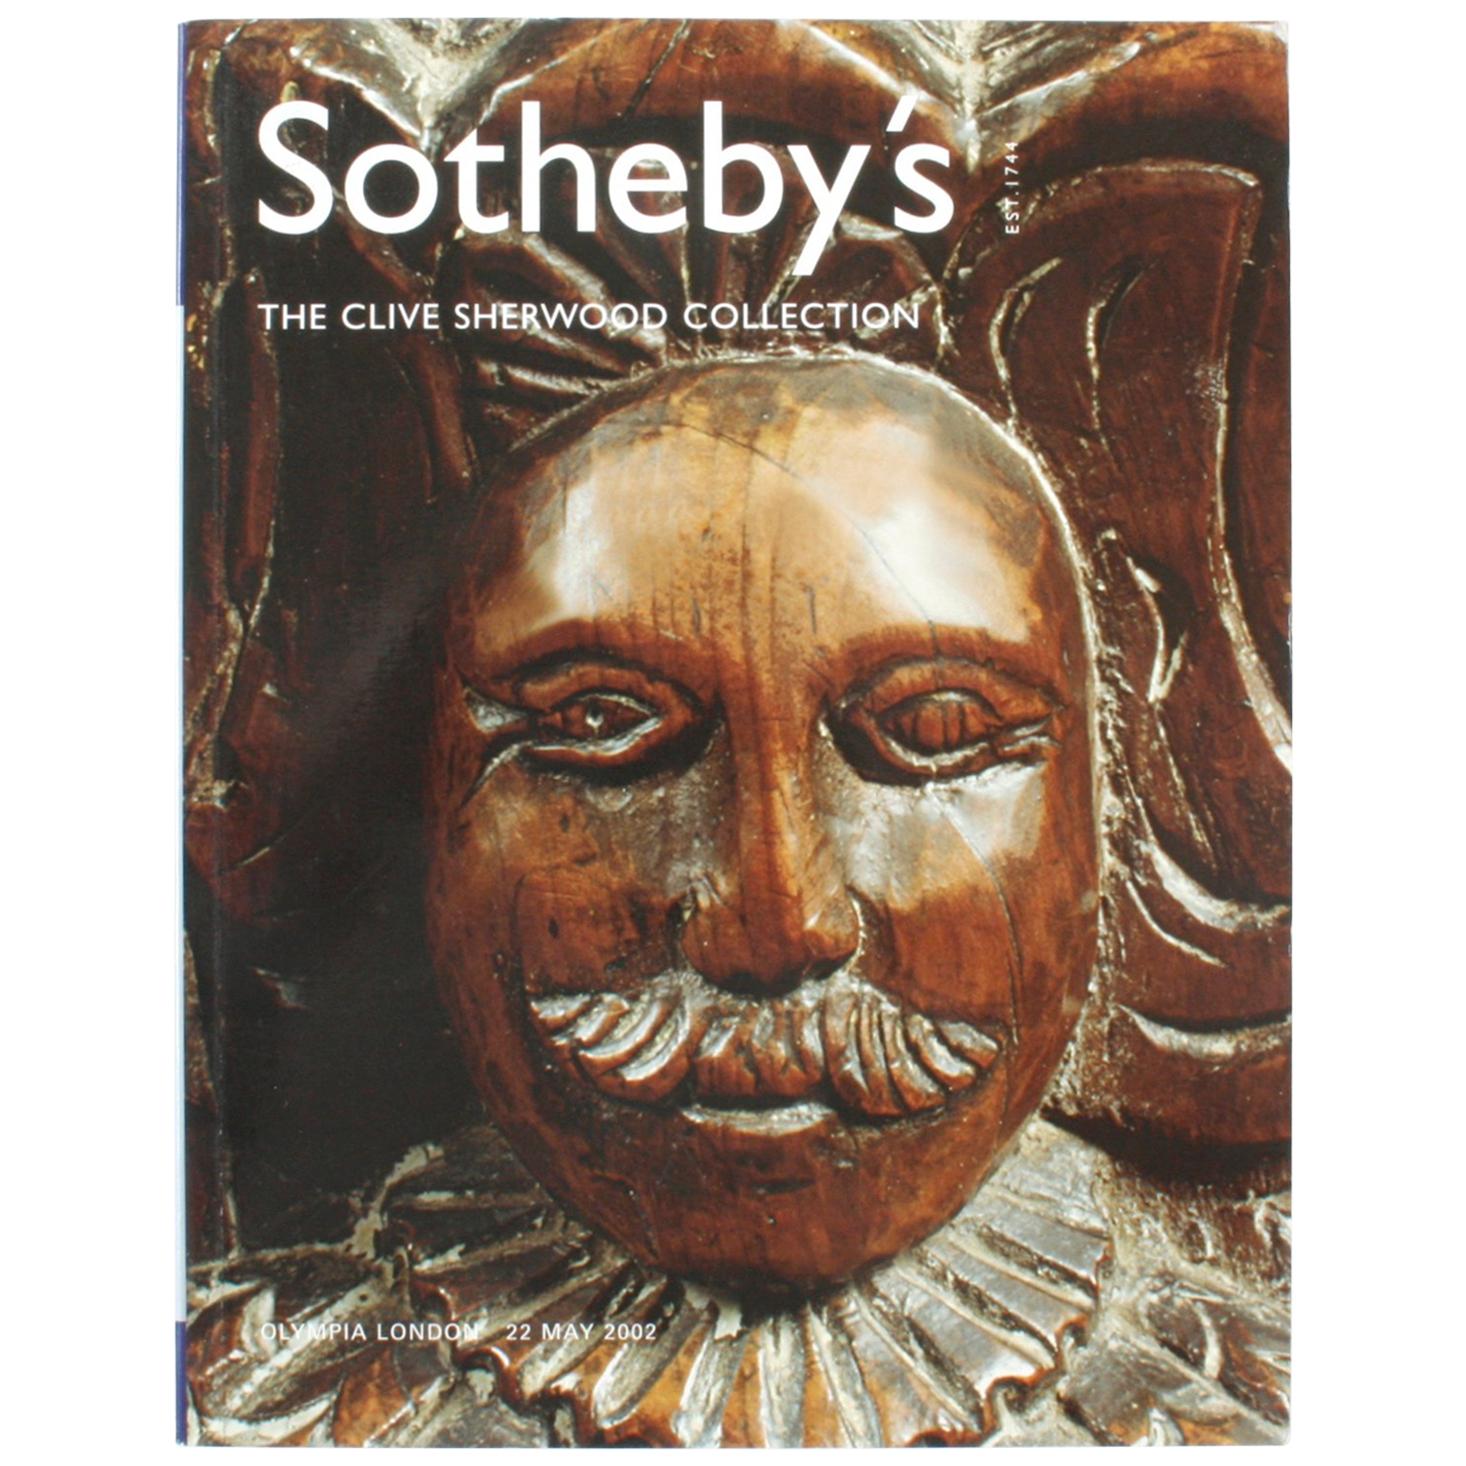 Sotheby's, the Clive Sherwood Collection 22 May 2002